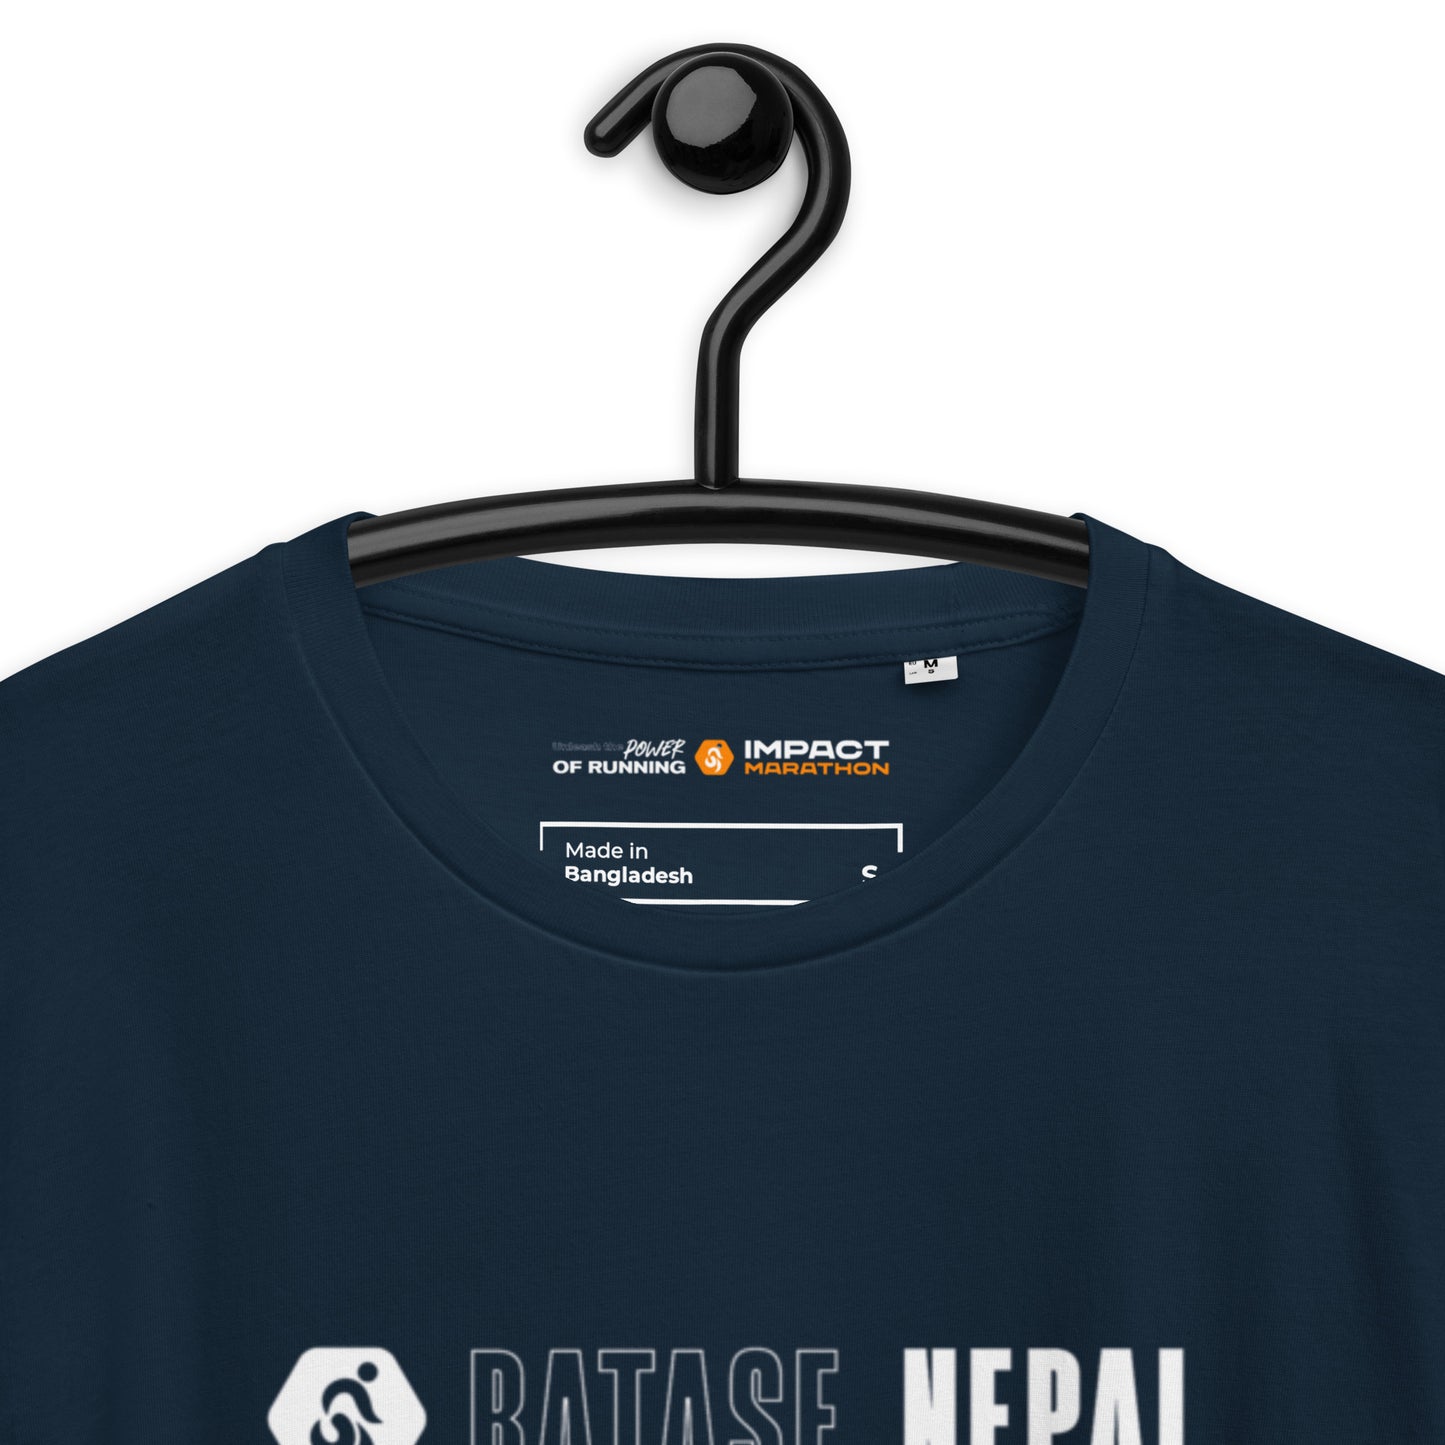 Find me in...Nepal